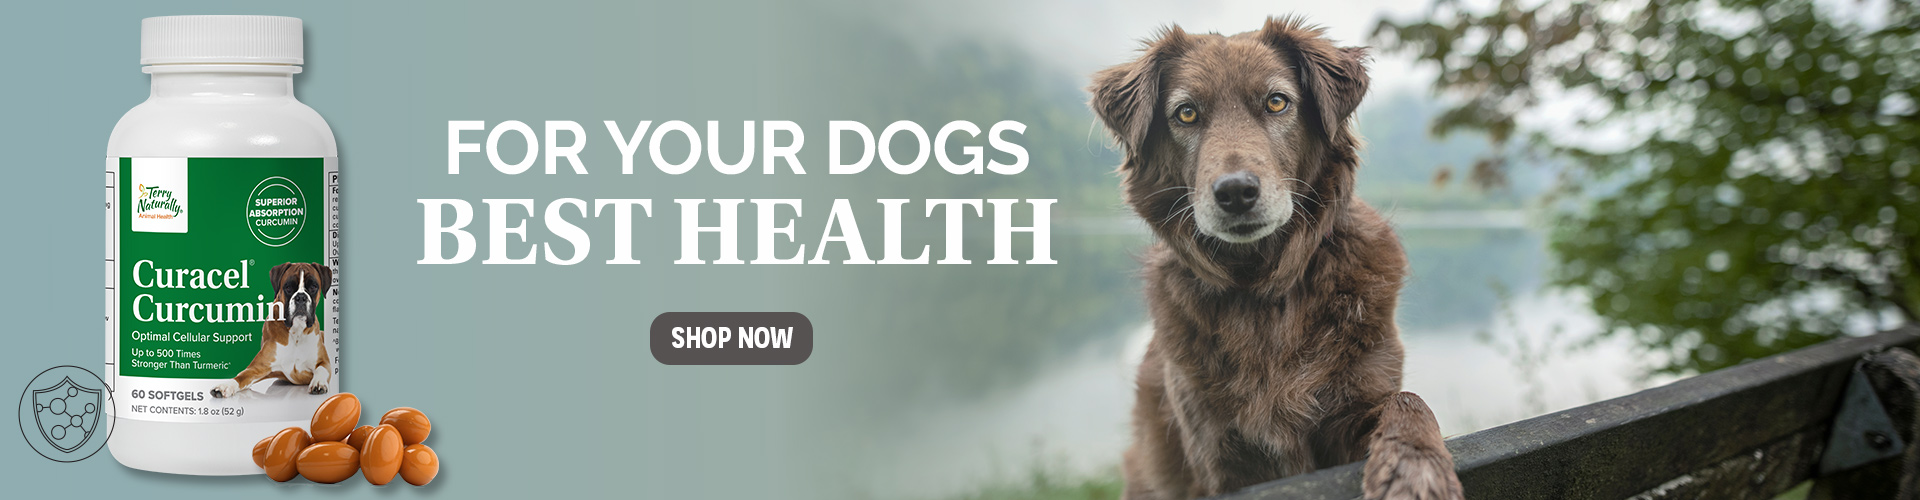 For Your Dogs BEST HEALTH • Curacel® Curcumin • SHOP NOW